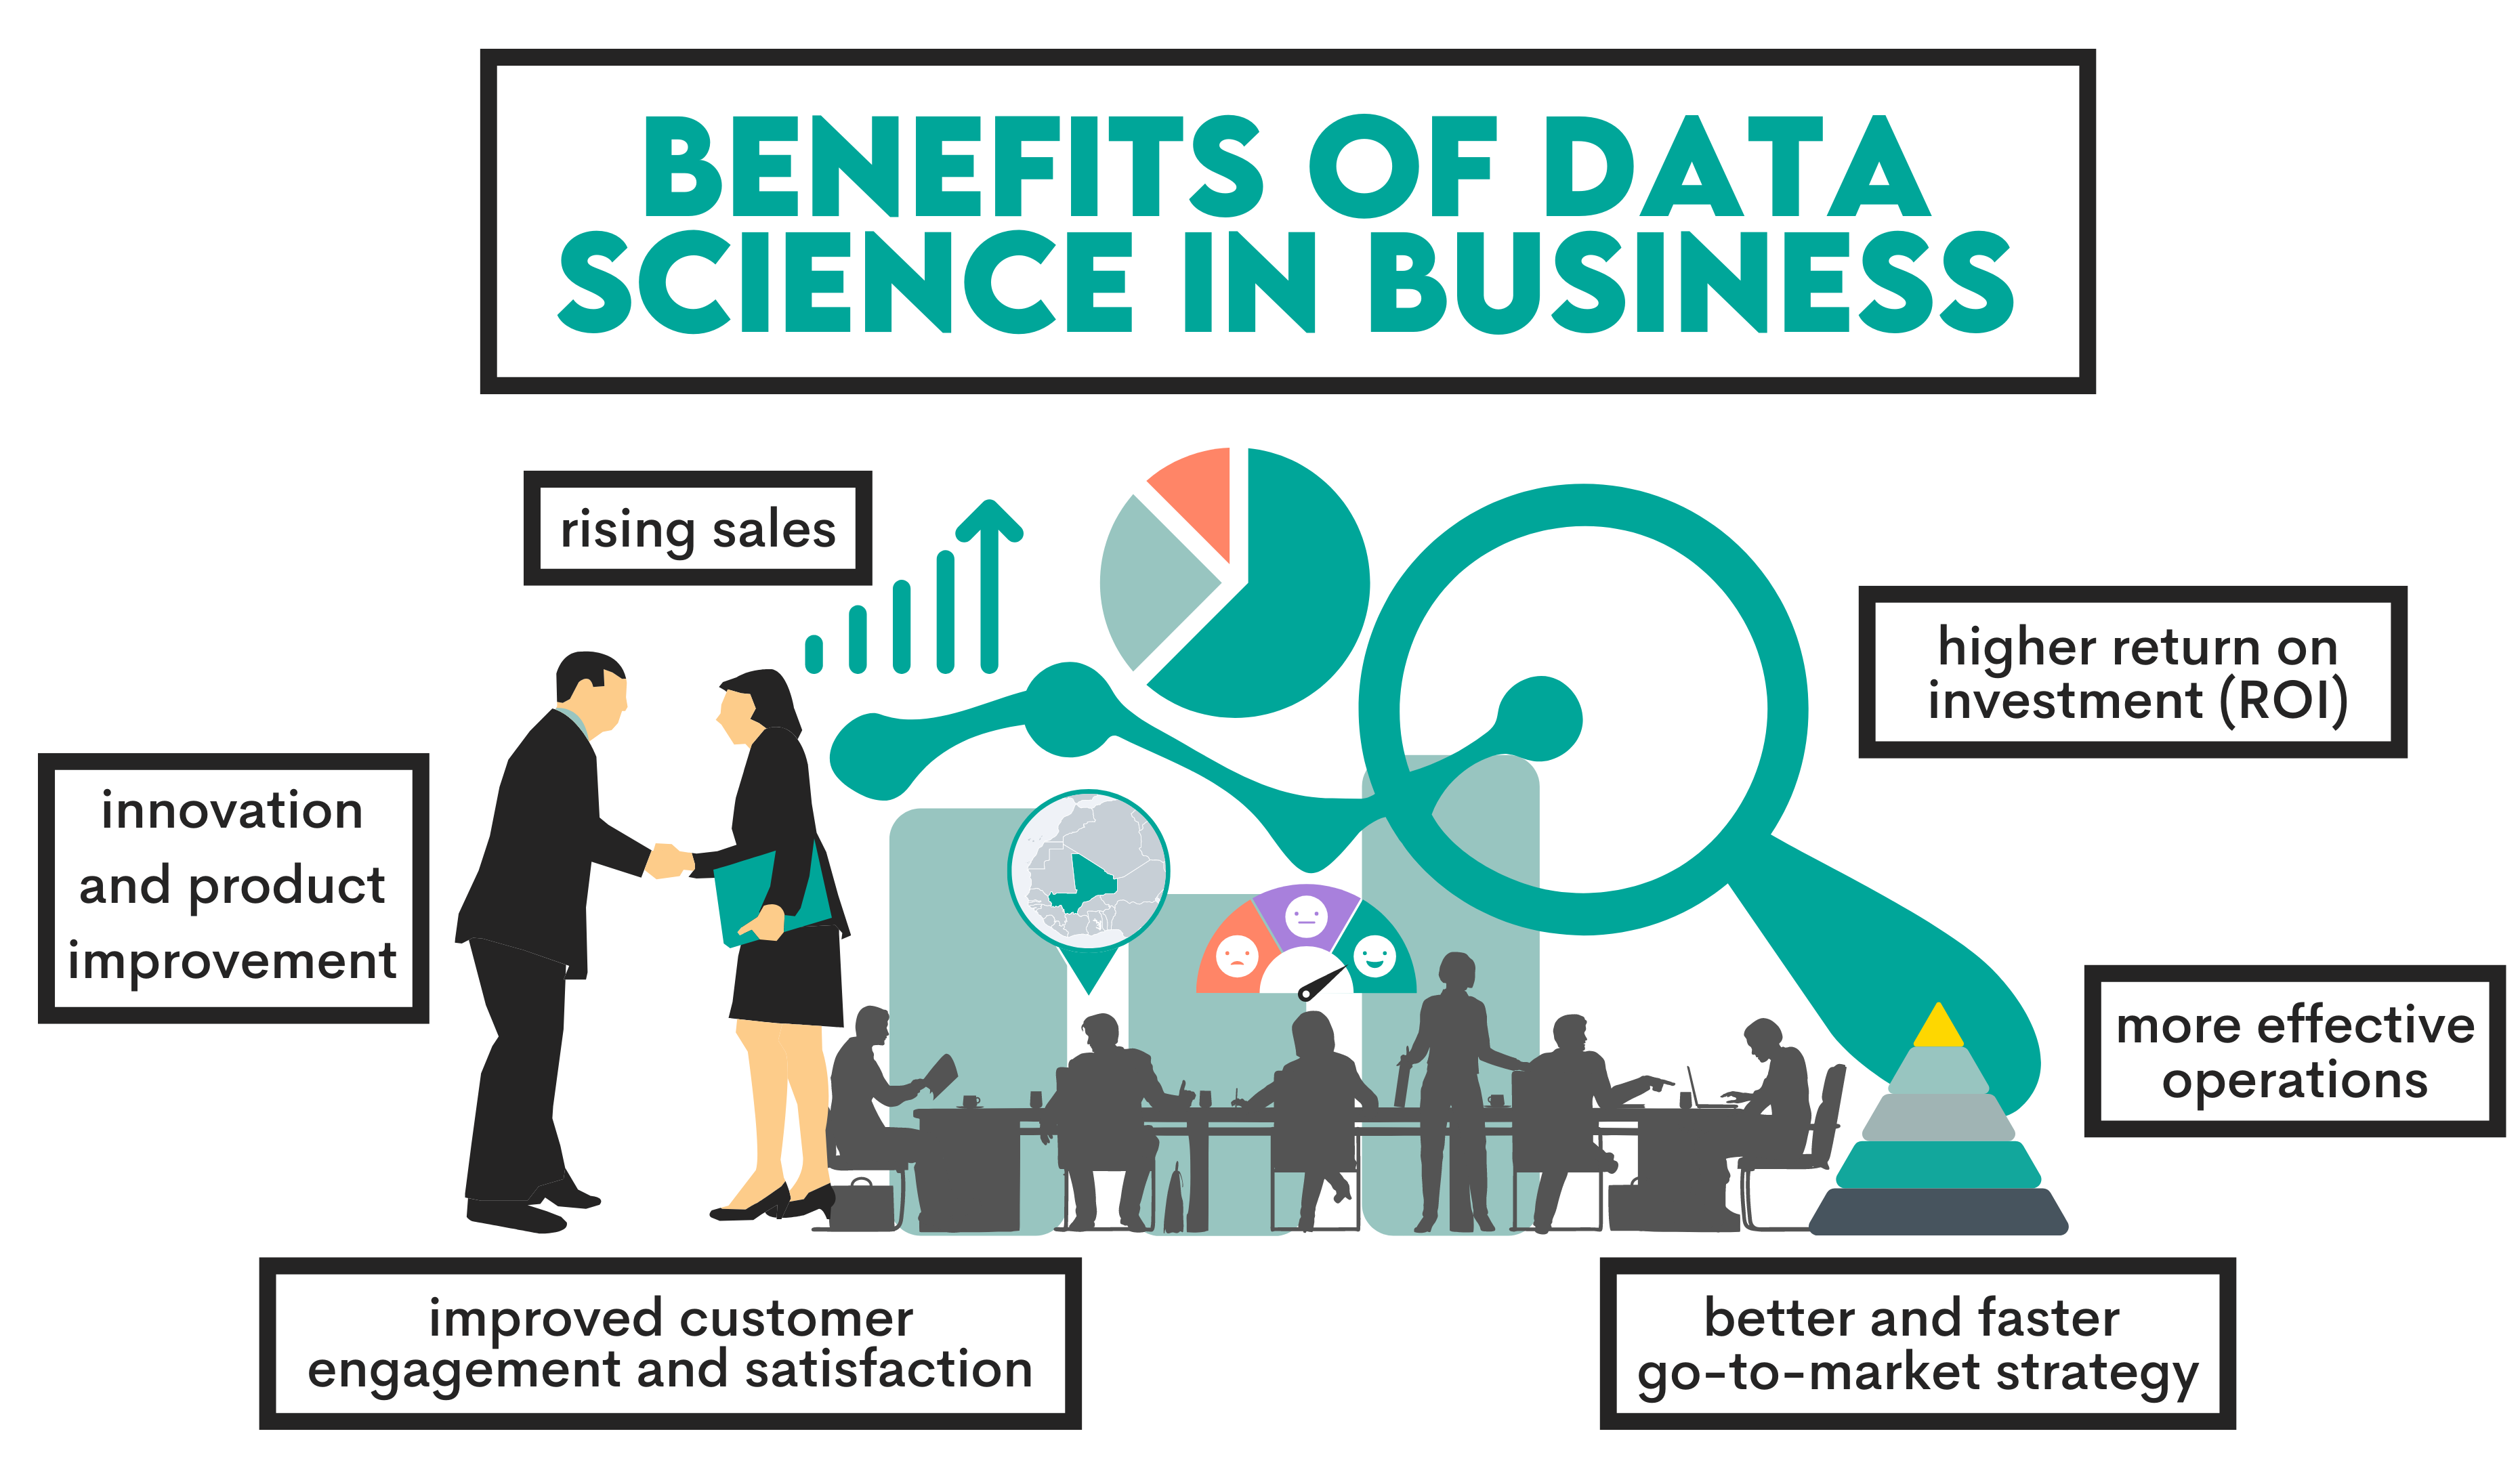 Benefits of Data Science in Business